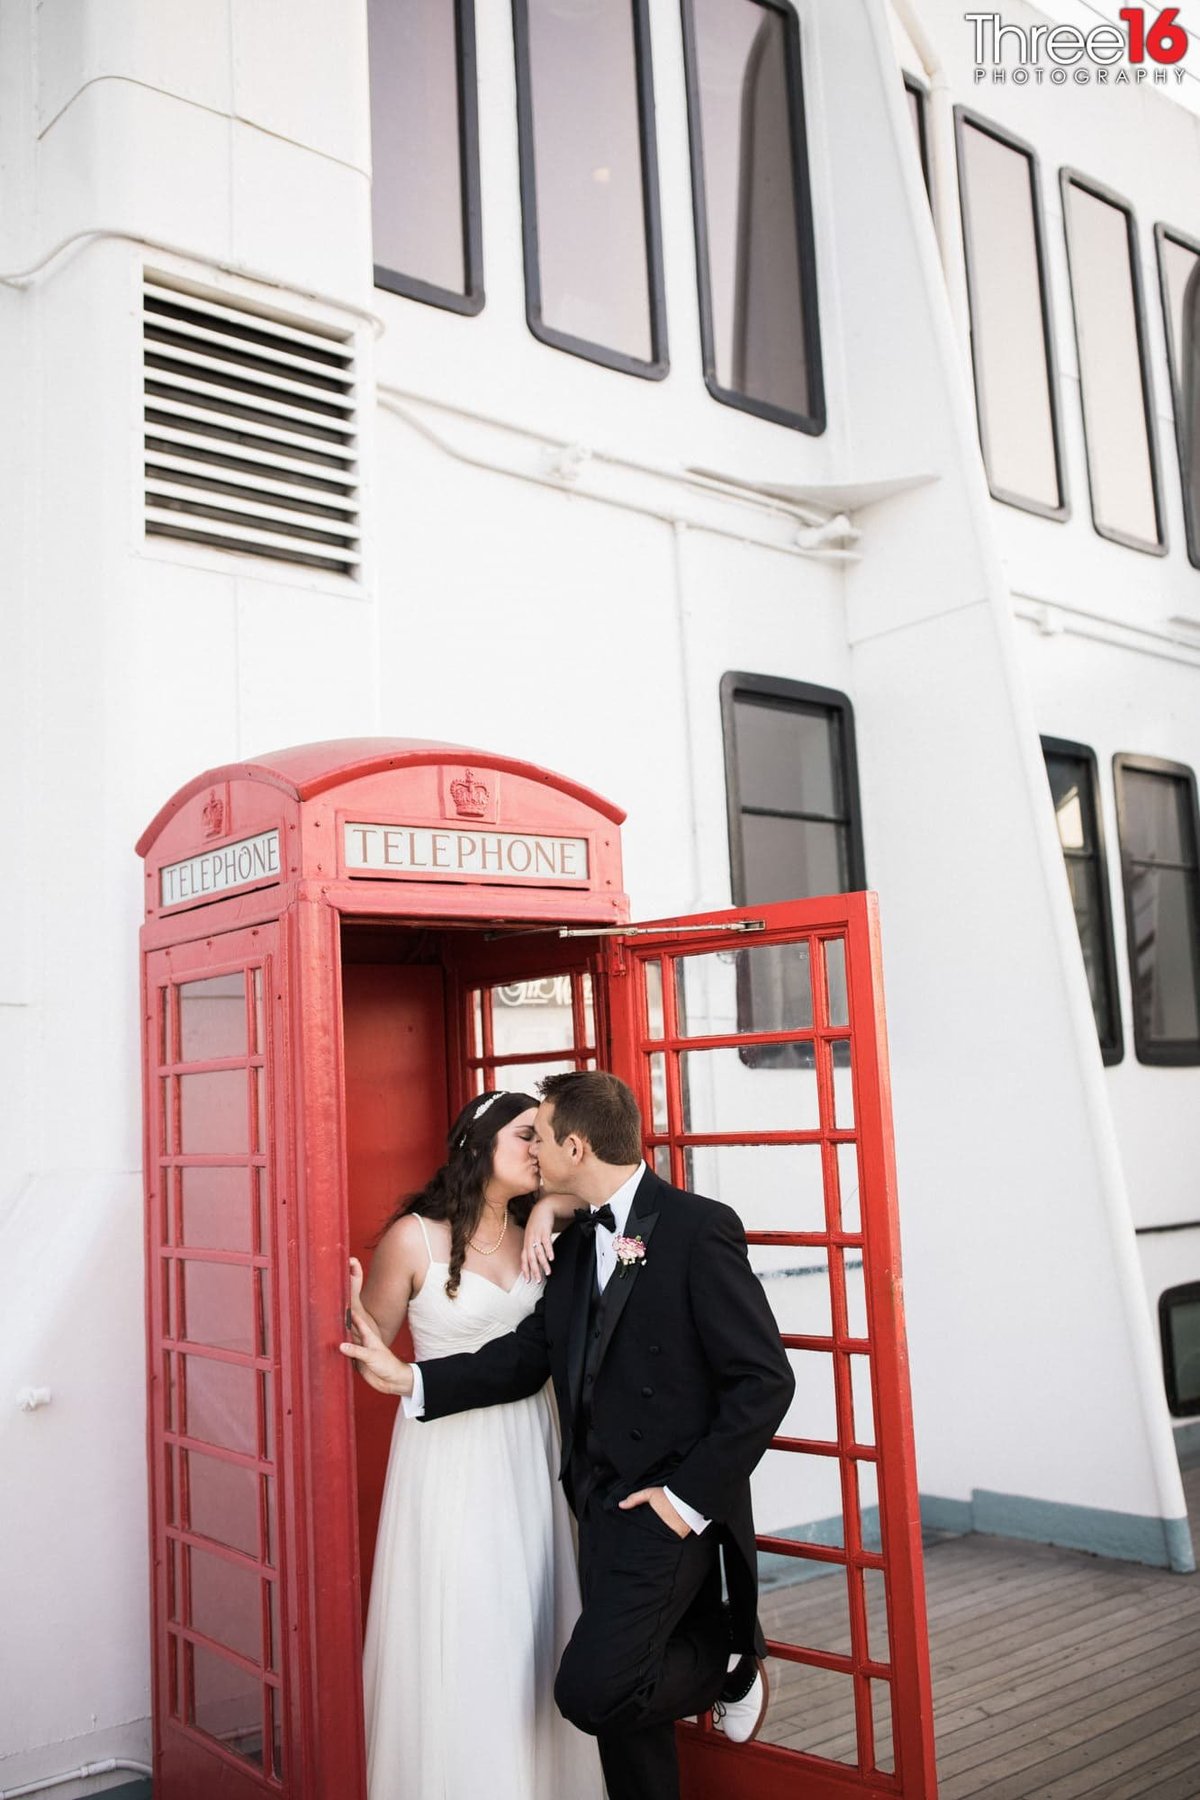 Bride and Groom share a kiss in the entry way to an English-style red phone booth